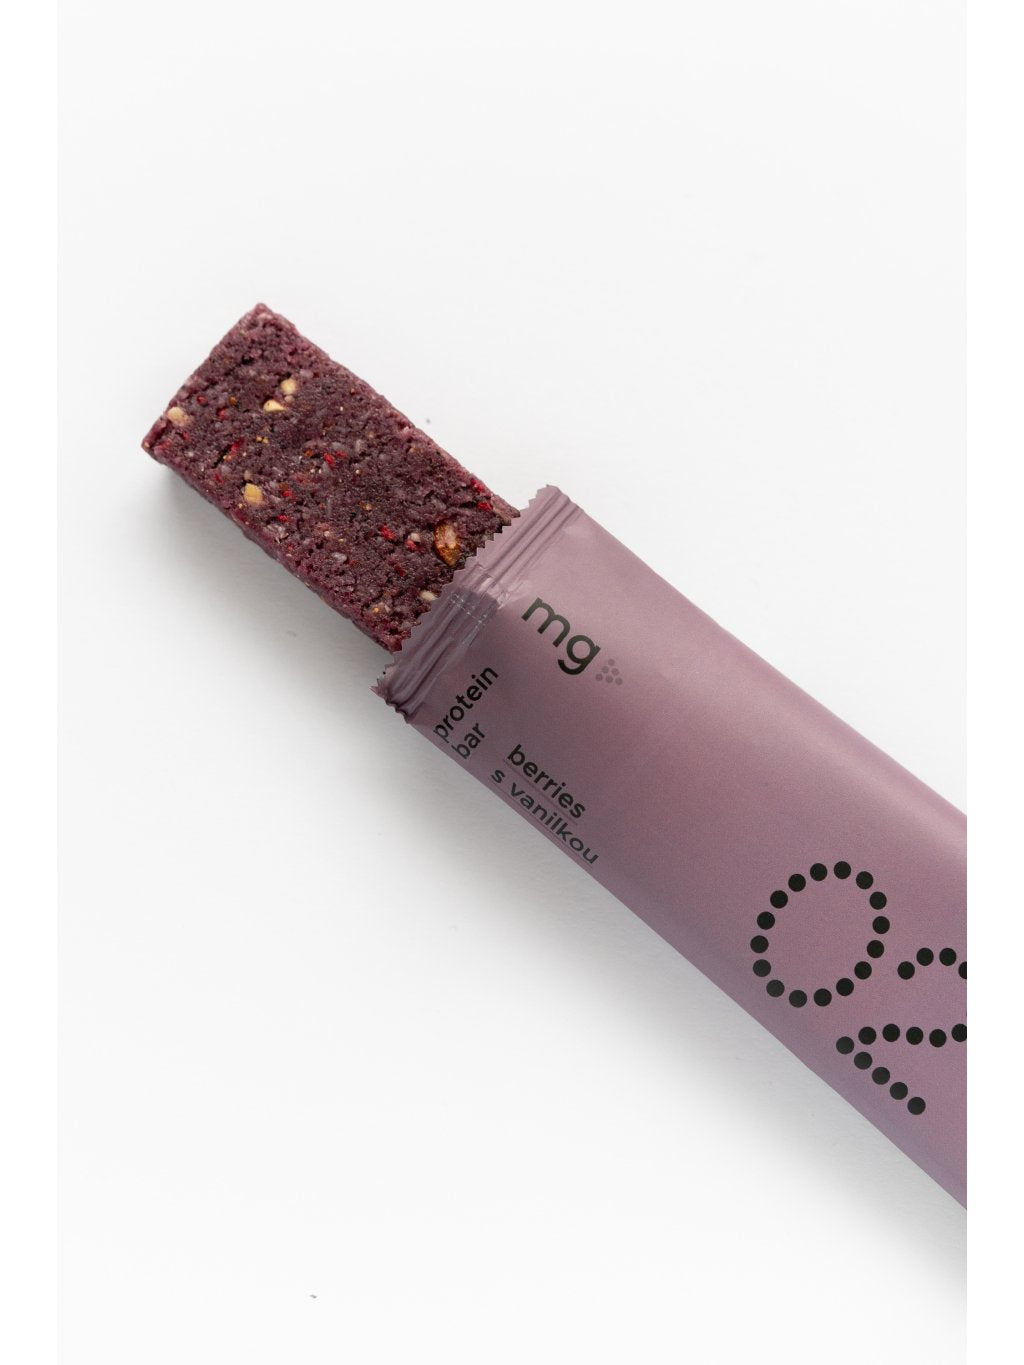 MG – Protein Bar 02 - Berries with Vanilla